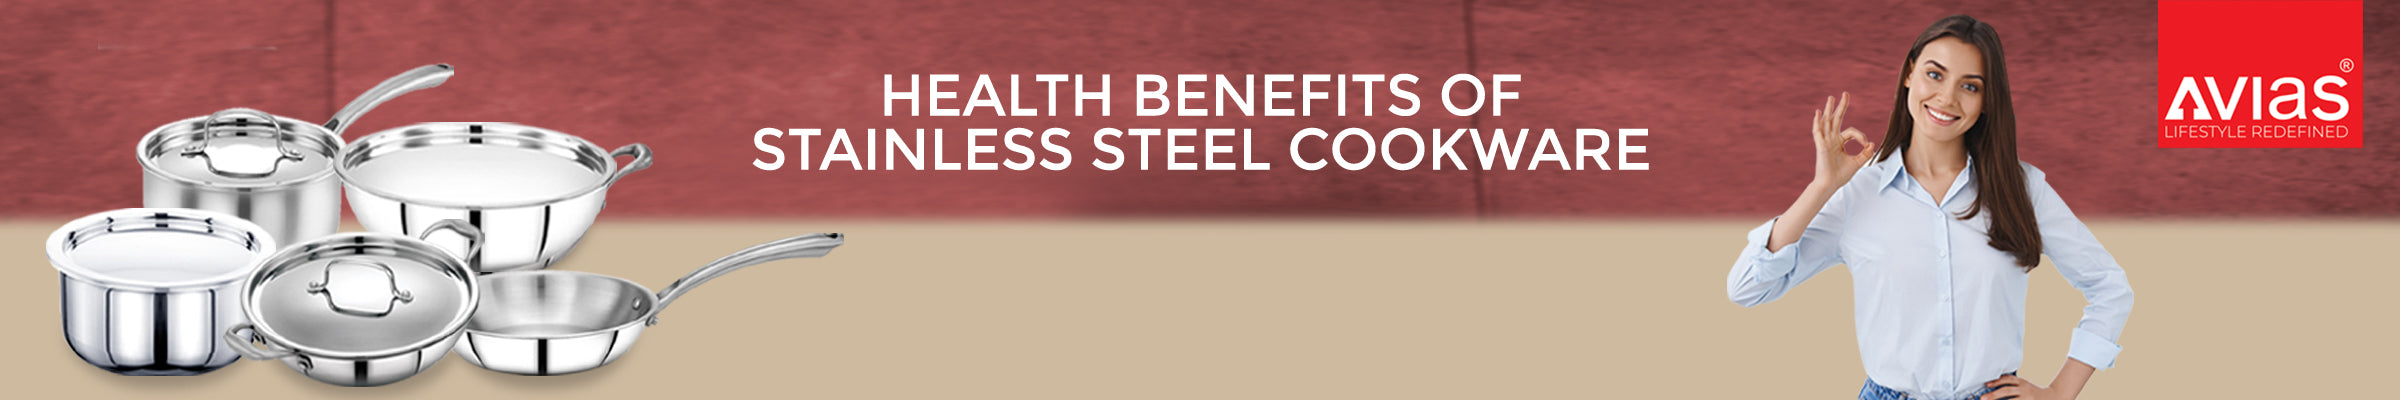 Health benefits of stainless steel cookware from Avias